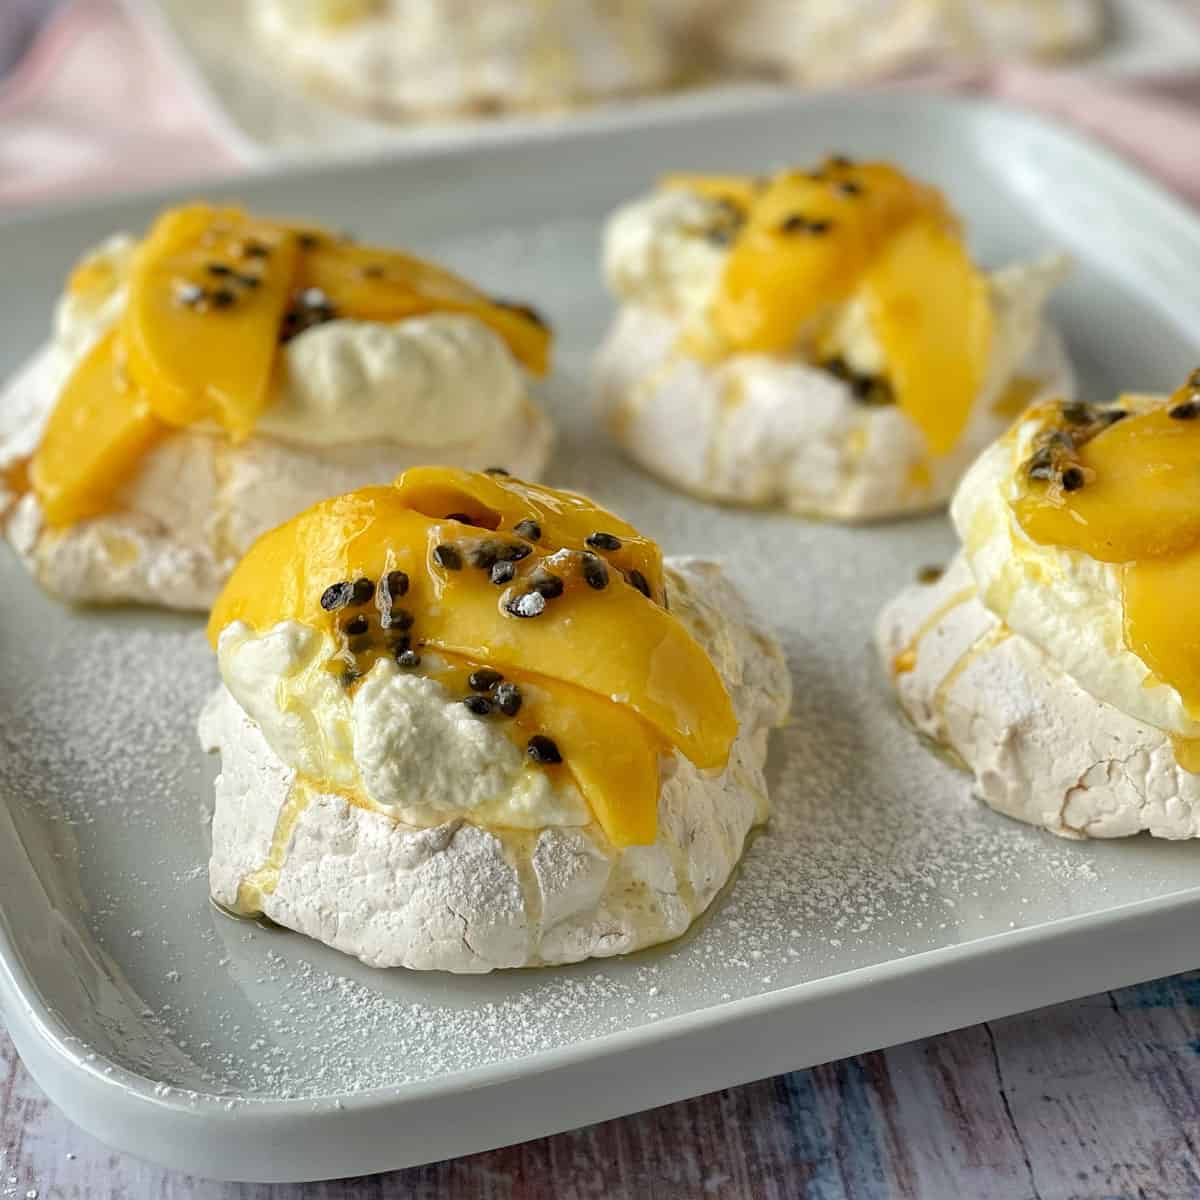 Mini pavlovas on a white plate with sliced mango and passionfruit on top